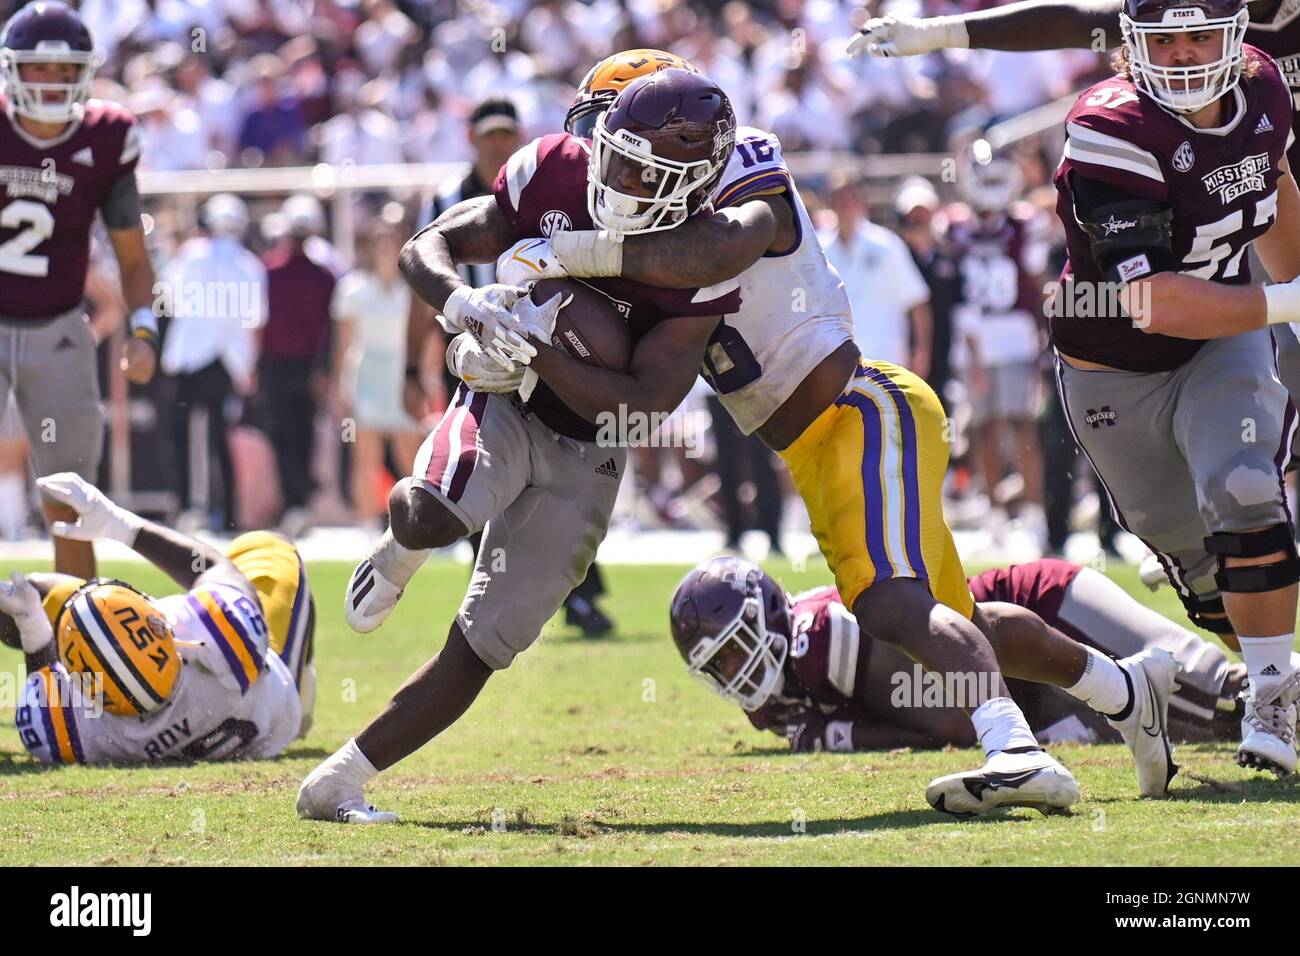 Starkville, MS, USA. 25th Sep, 2021. Mississippi State Bulldogs running back Jo'quavious Marks (7) runs the ball and is met by LSU Tigers linebacker Damone Clark (18) during the NCAA football game between the LSU Tigers and the Mississippi State Bulldogs at Davis Wade Stadium in Starkville, MS. Kevin Langley/CSM/Alamy Live News Stock Photo